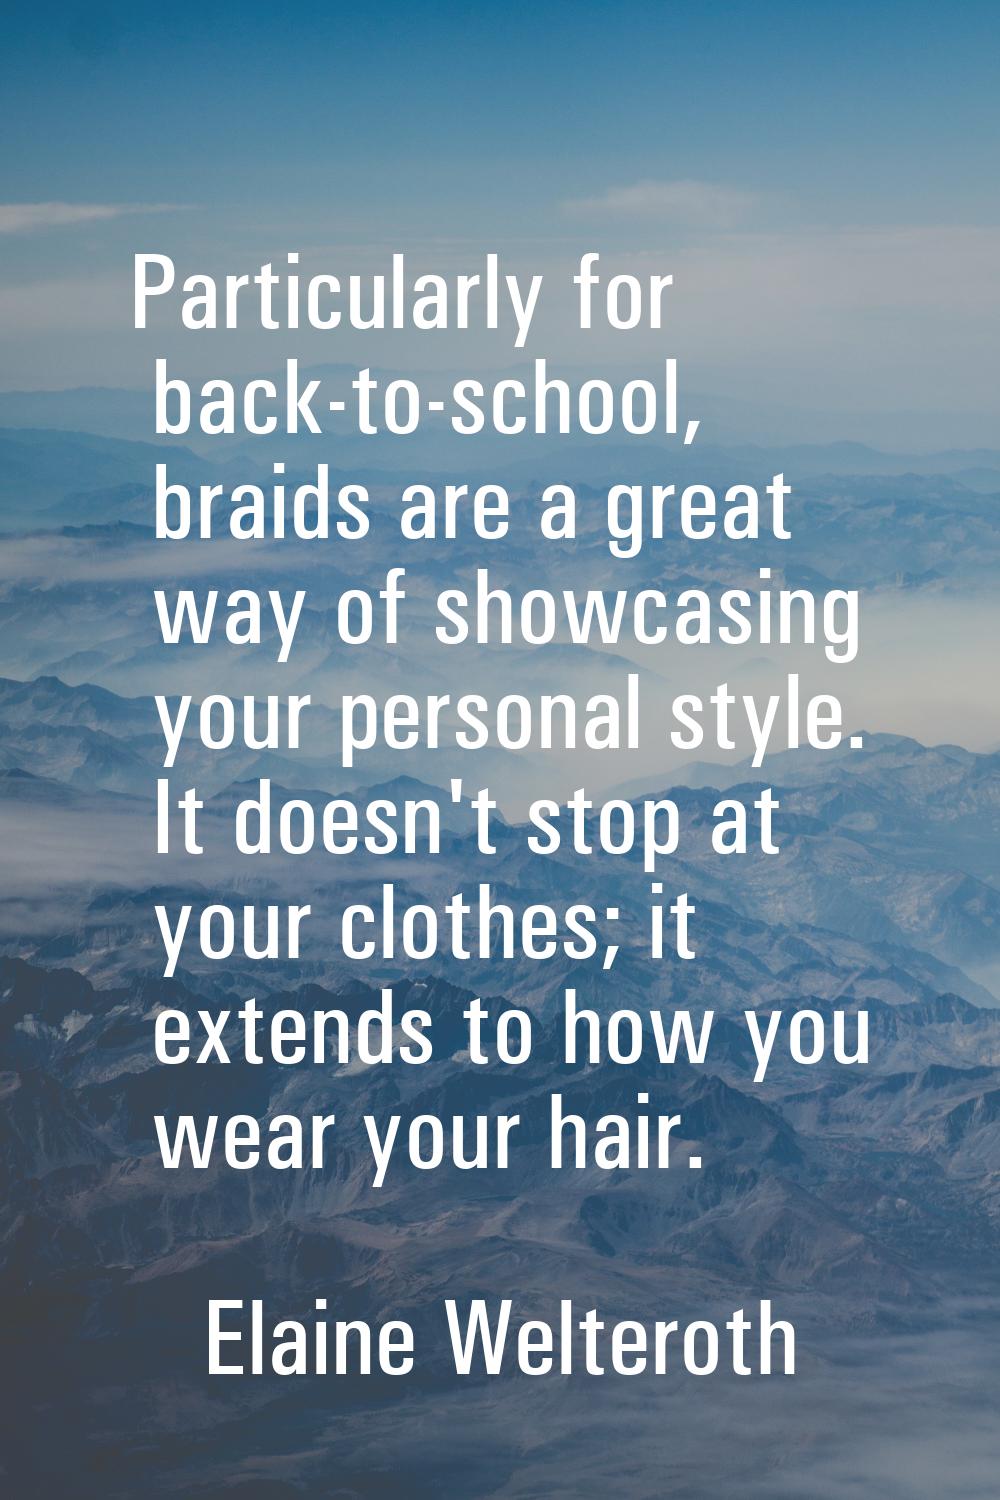 Particularly for back-to-school, braids are a great way of showcasing your personal style. It doesn